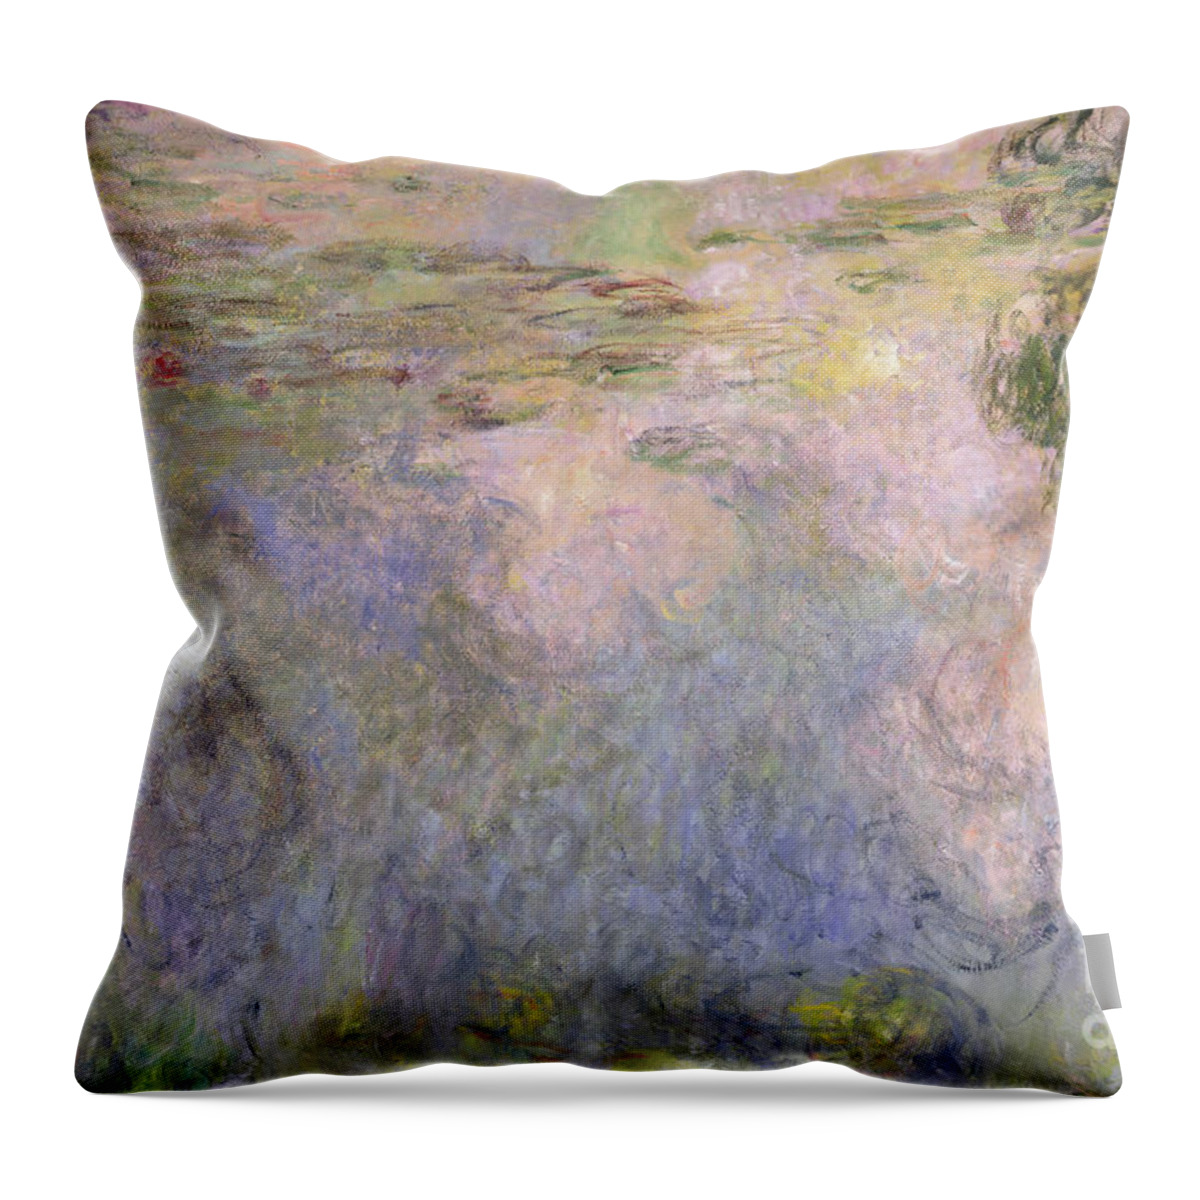 Monet Throw Pillow featuring the painting The Waterlily Pond by Claude Monet